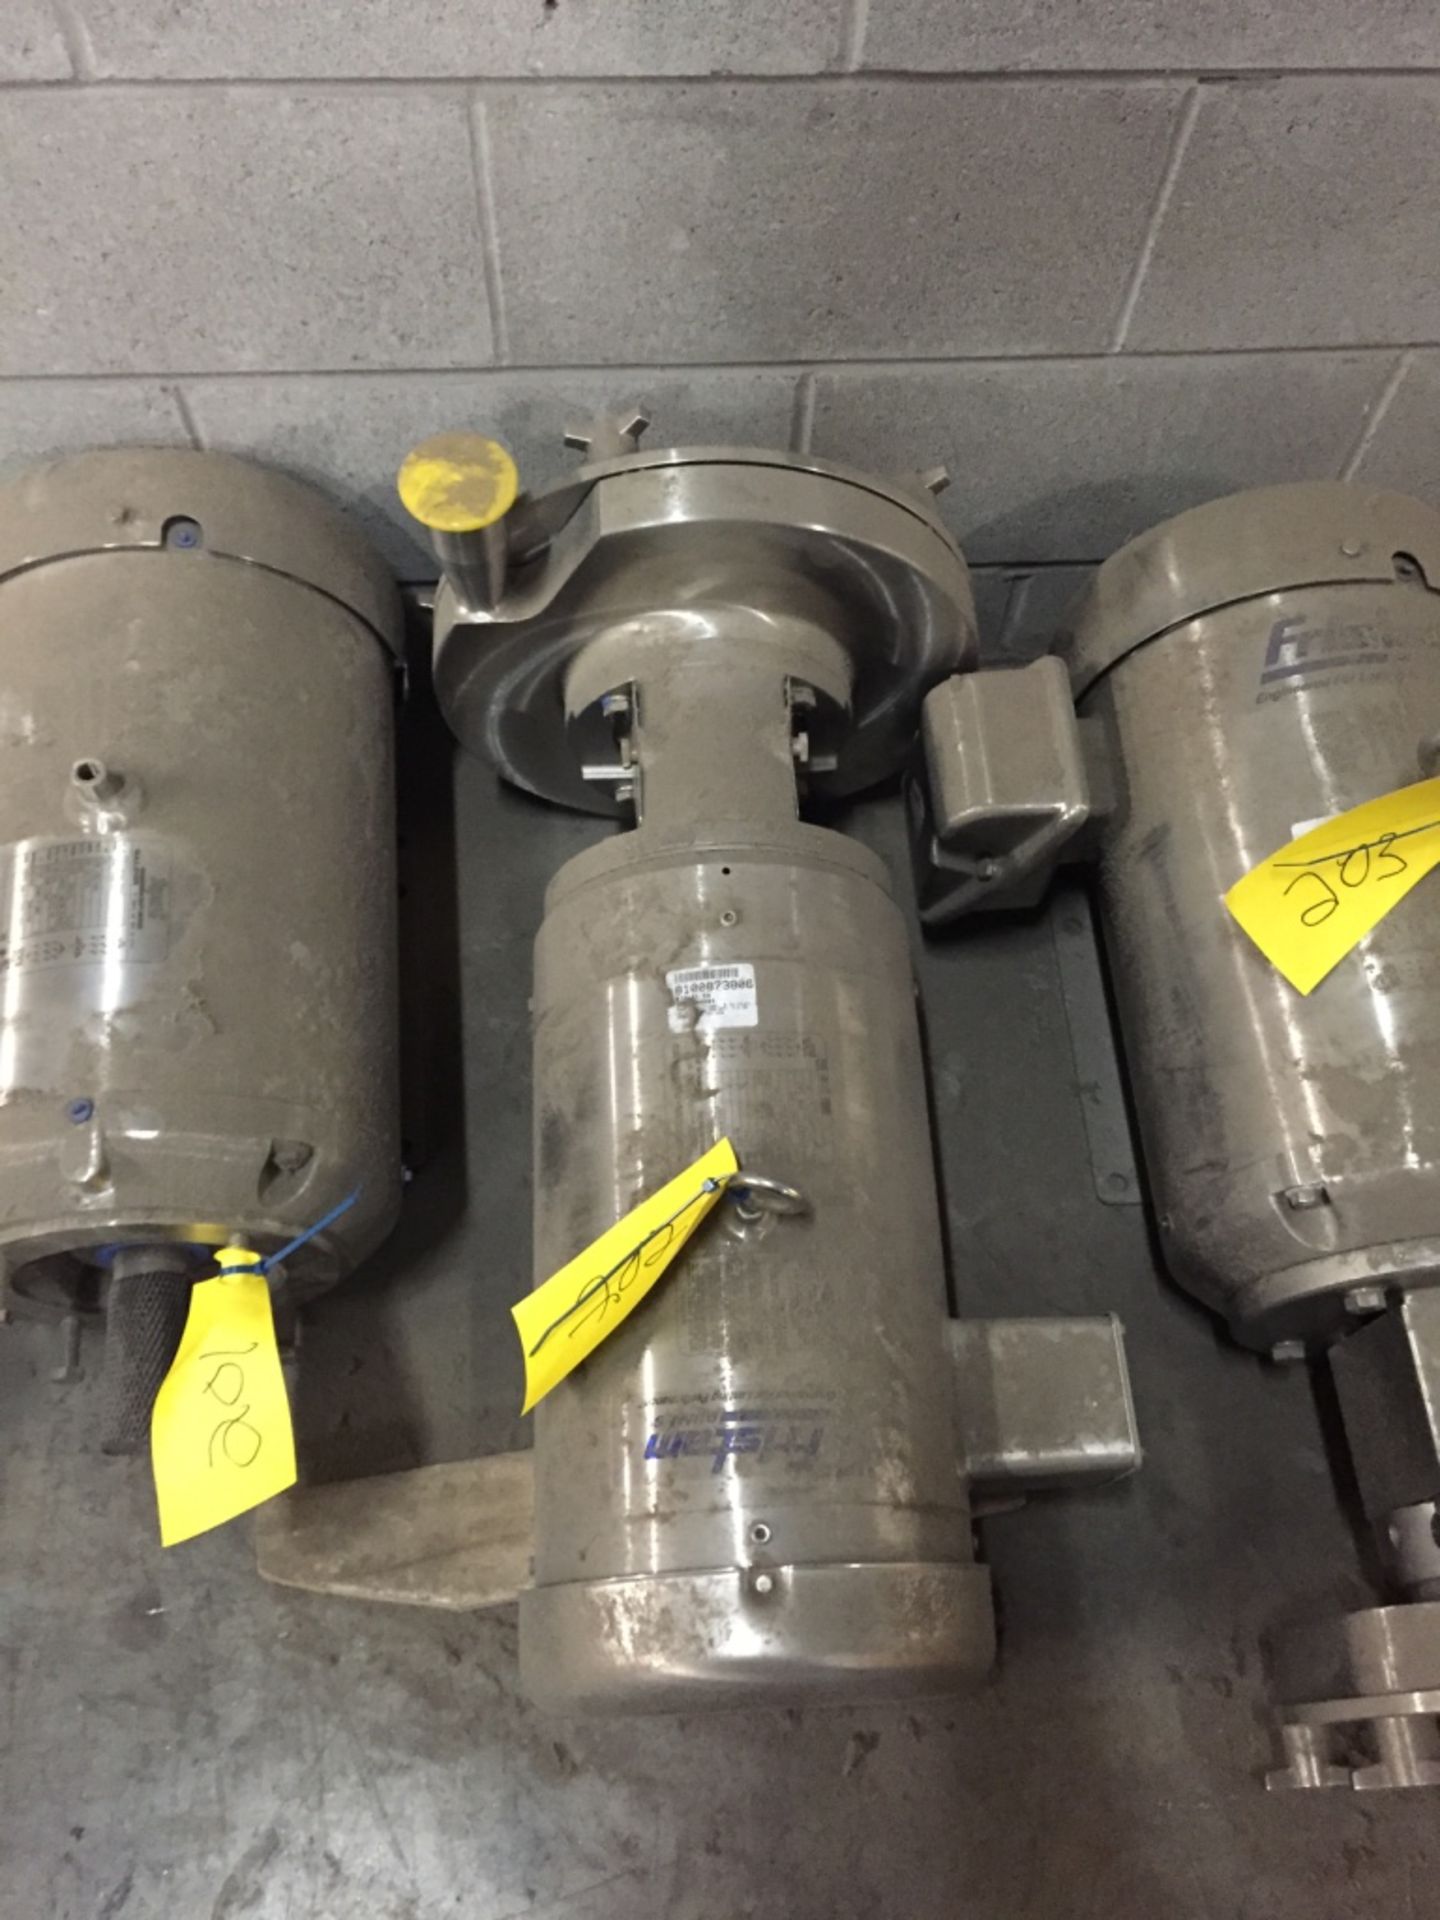 Fristam Pump with washdown motor, Model FPR751-250 - Rigging Fee $100, If Crating or Lumber is Need